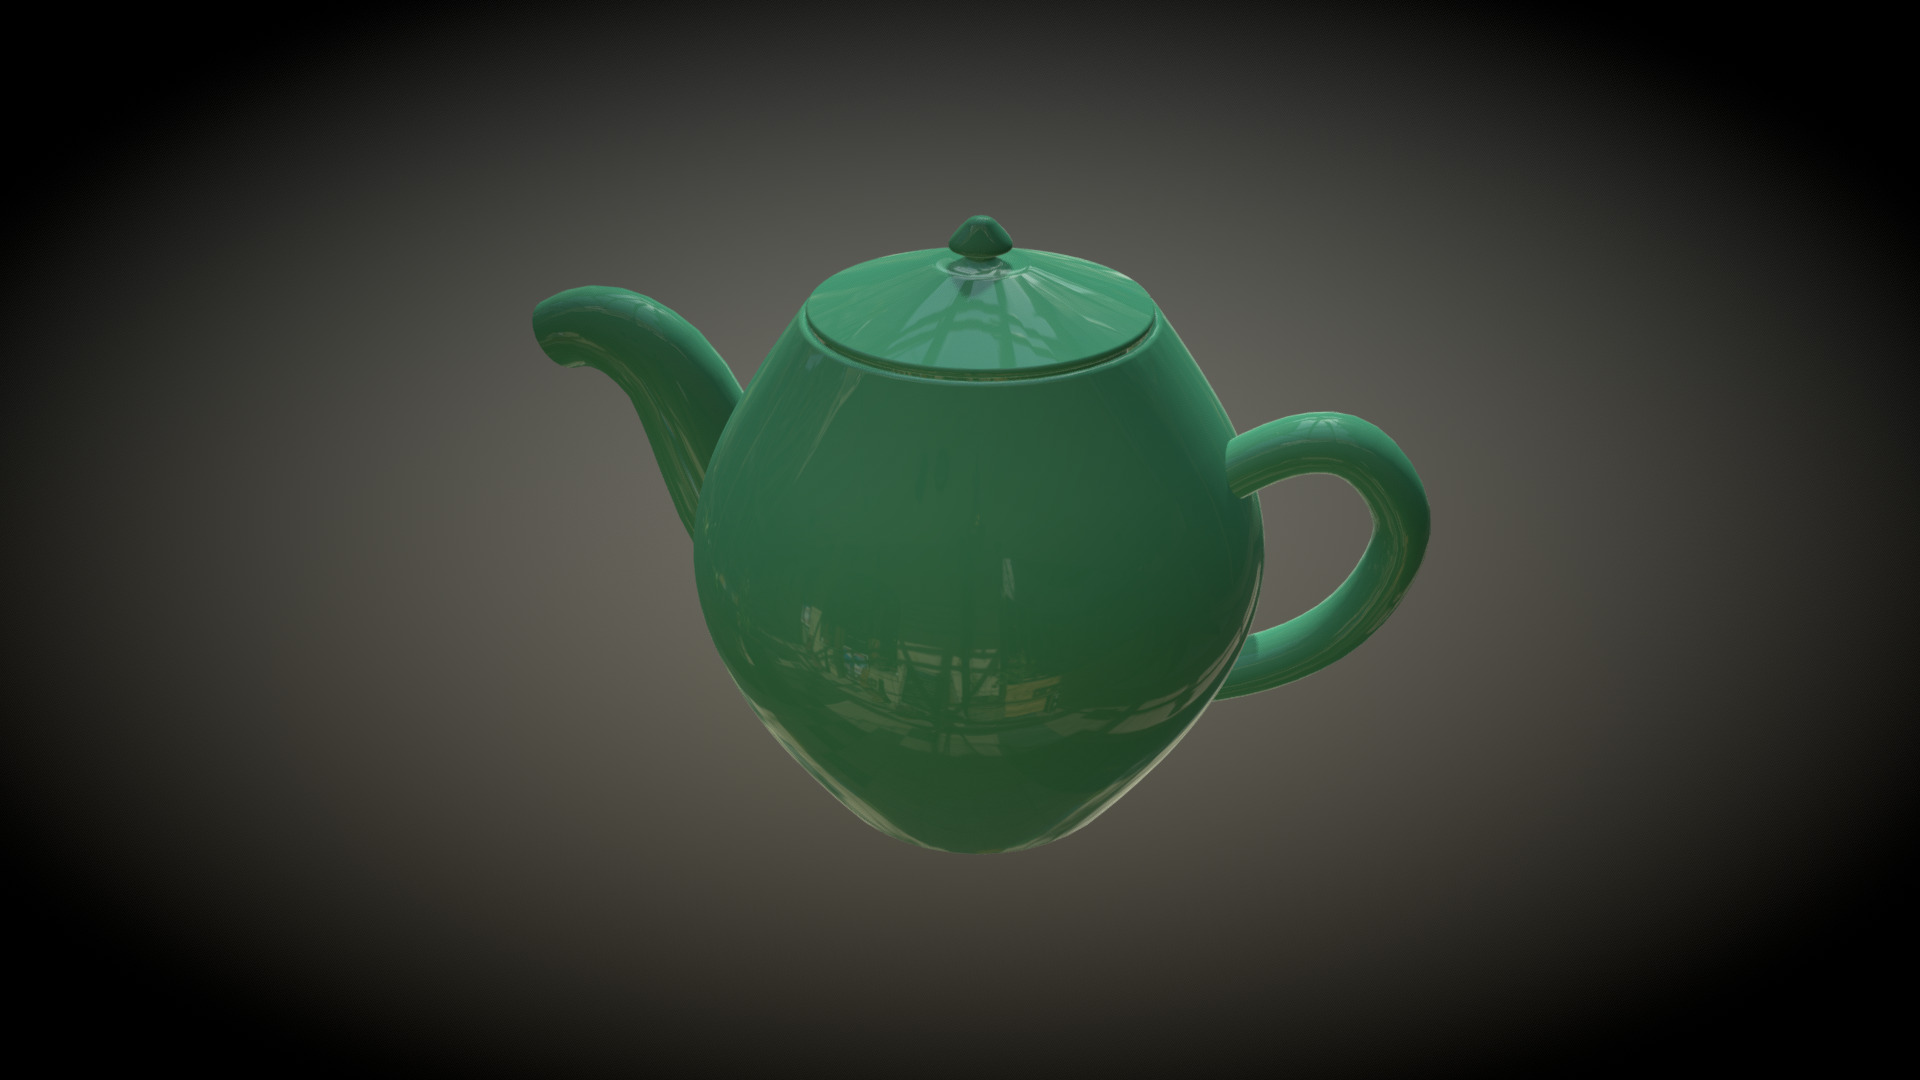 3D model Teapot - This is a 3D model of the Teapot. The 3D model is about a green teapot with a handle.